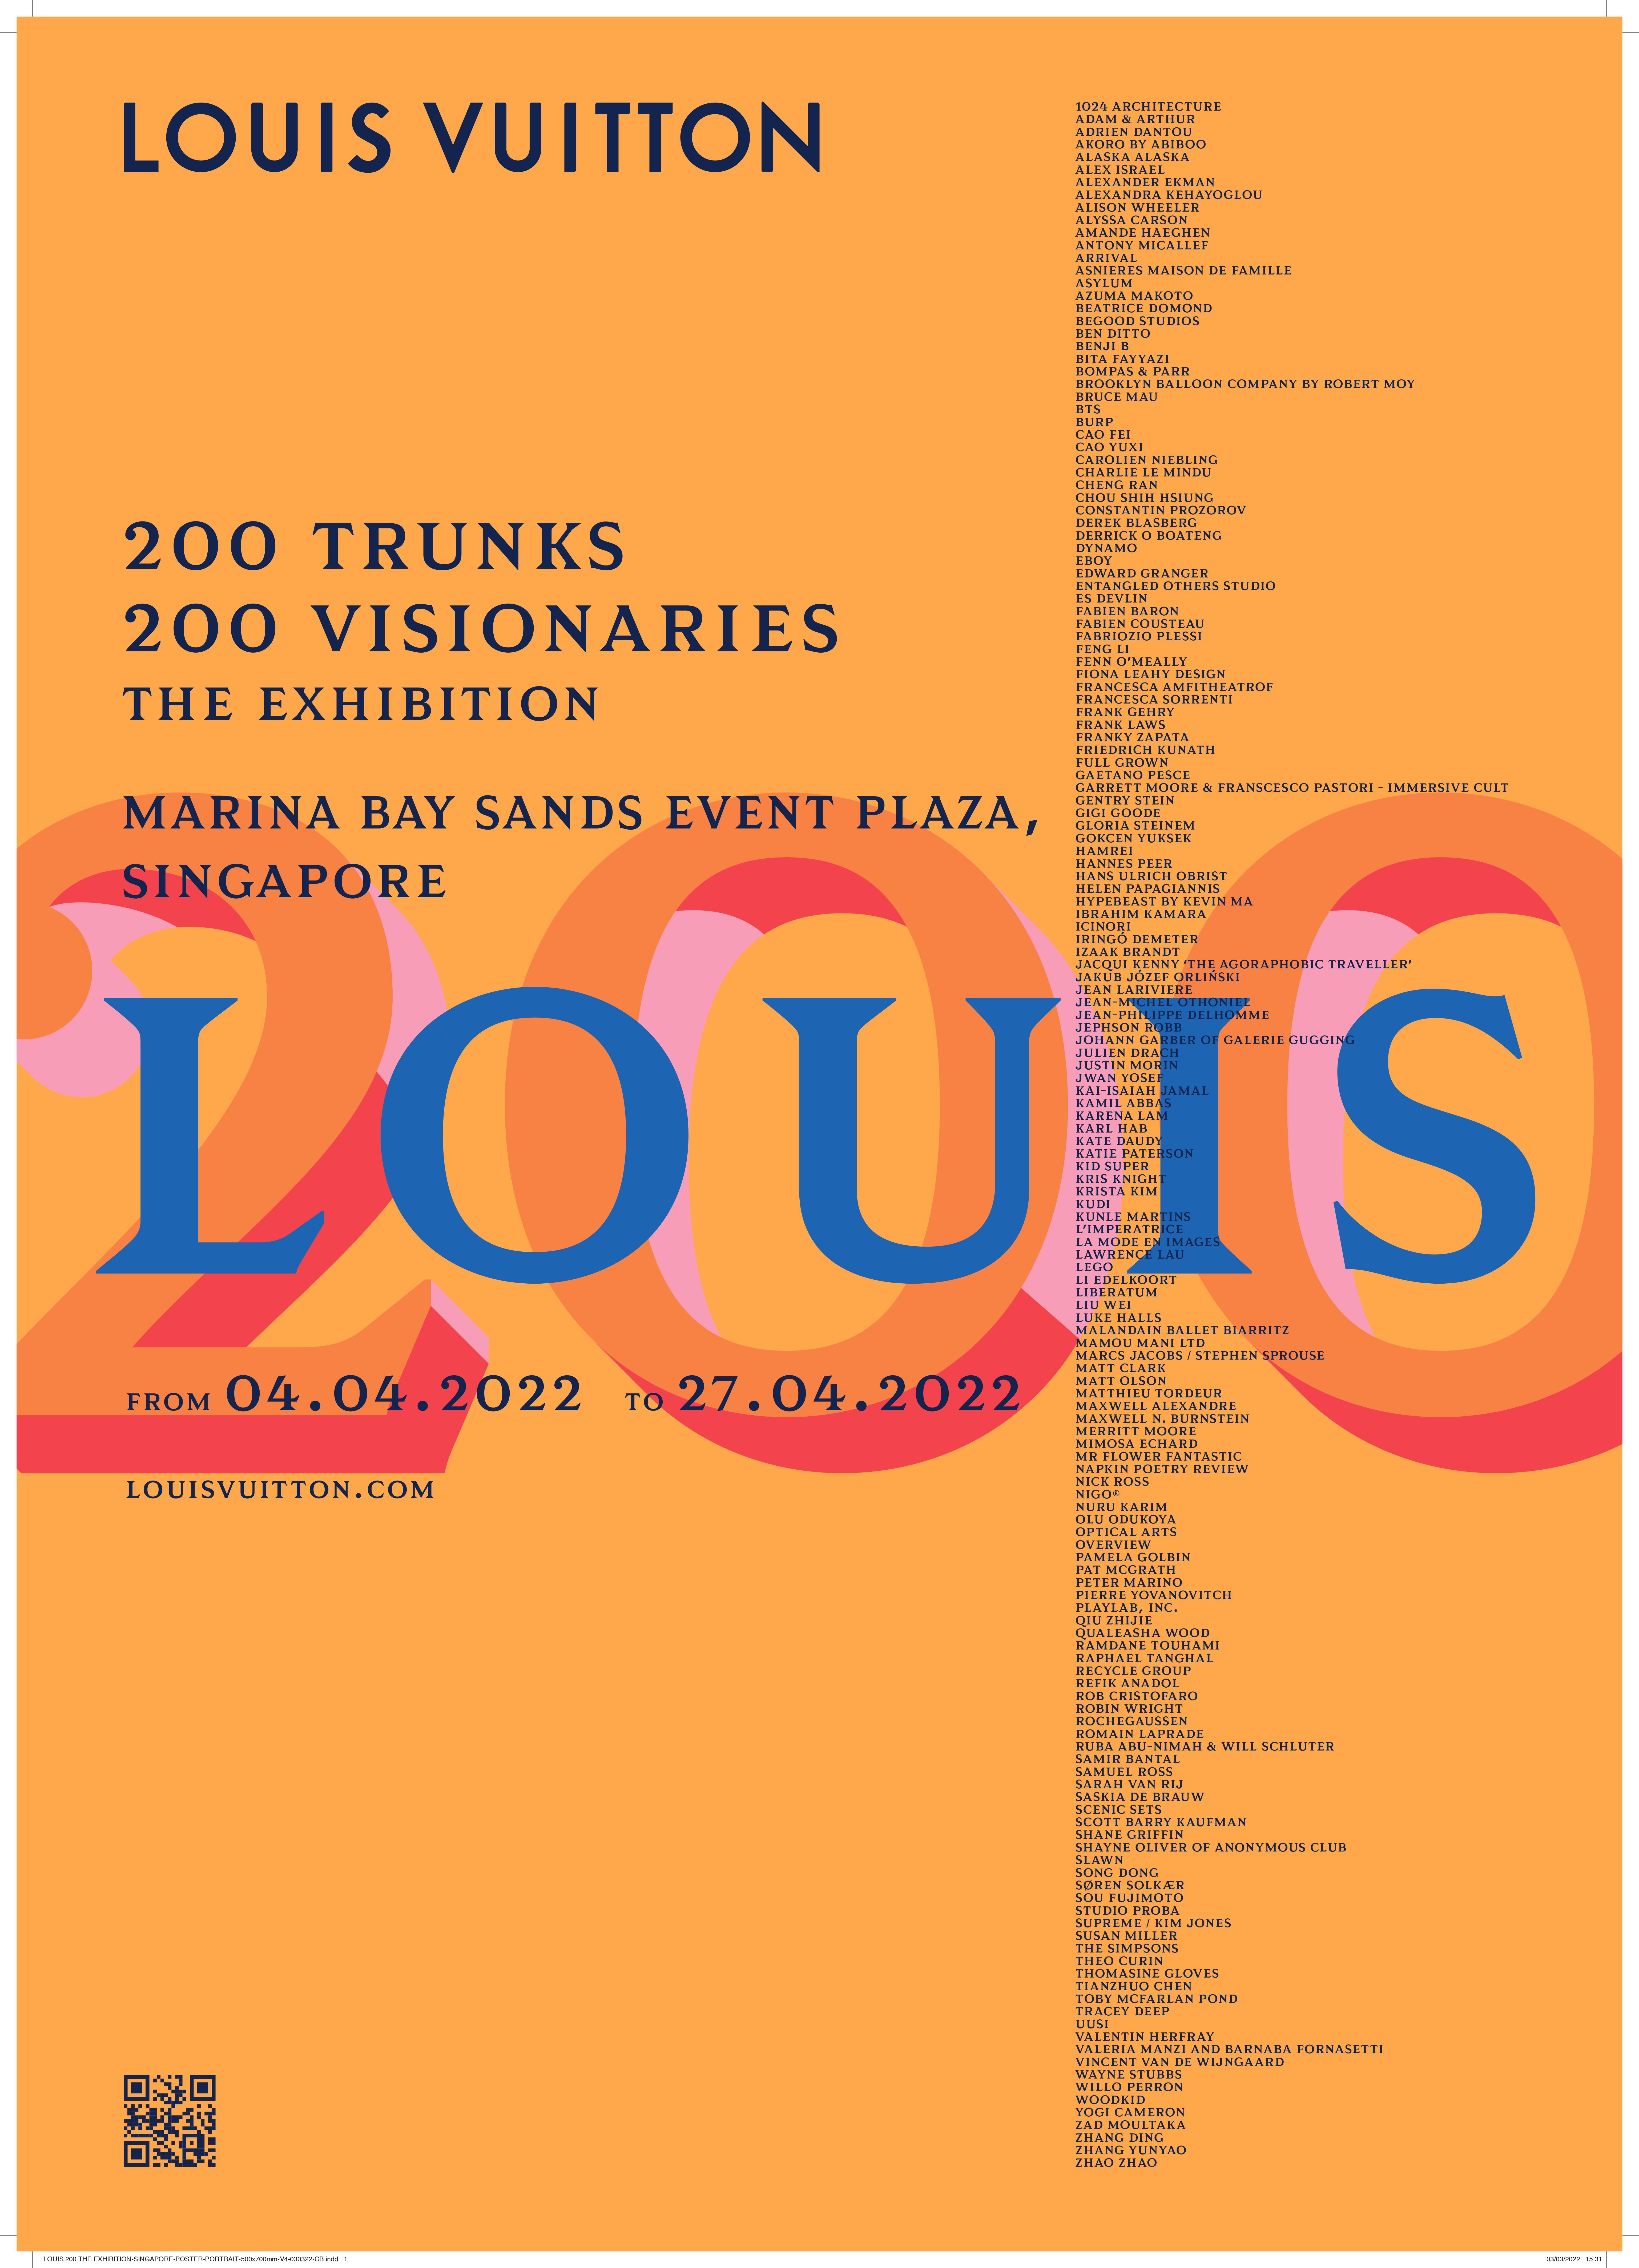 200 TRUNKS, 200 VISIONARIES: THE EXHIBITION IN NEW YORK